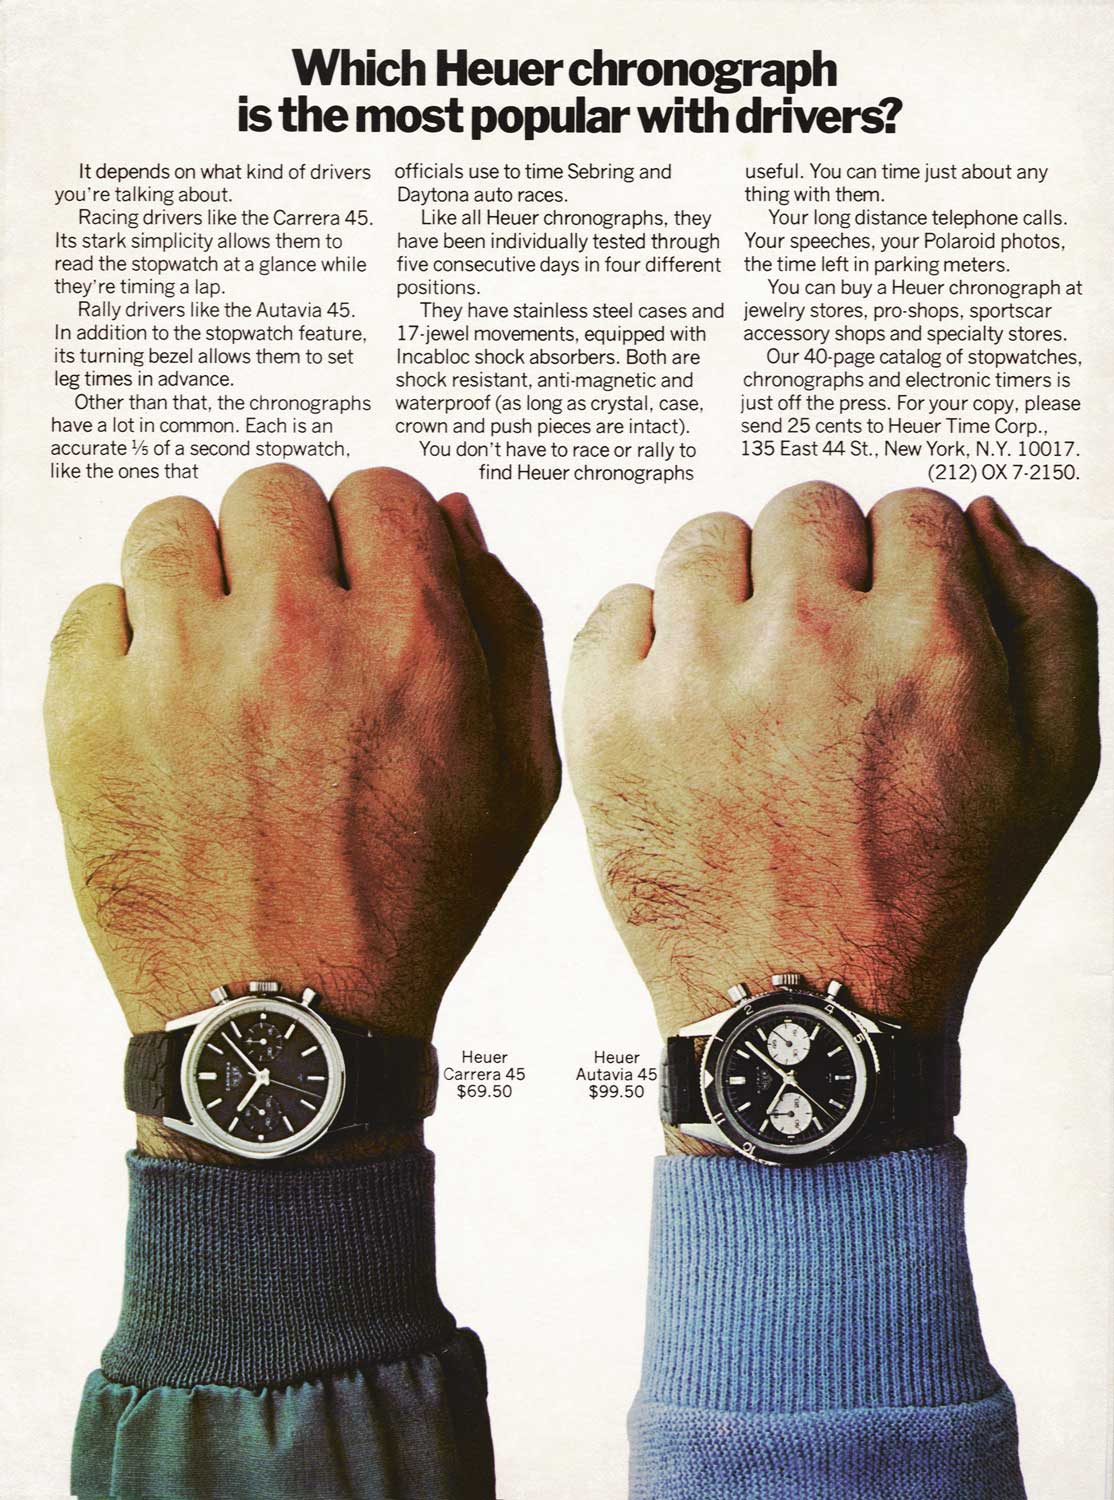 An advertisement for Heuer Chronographs from 1968